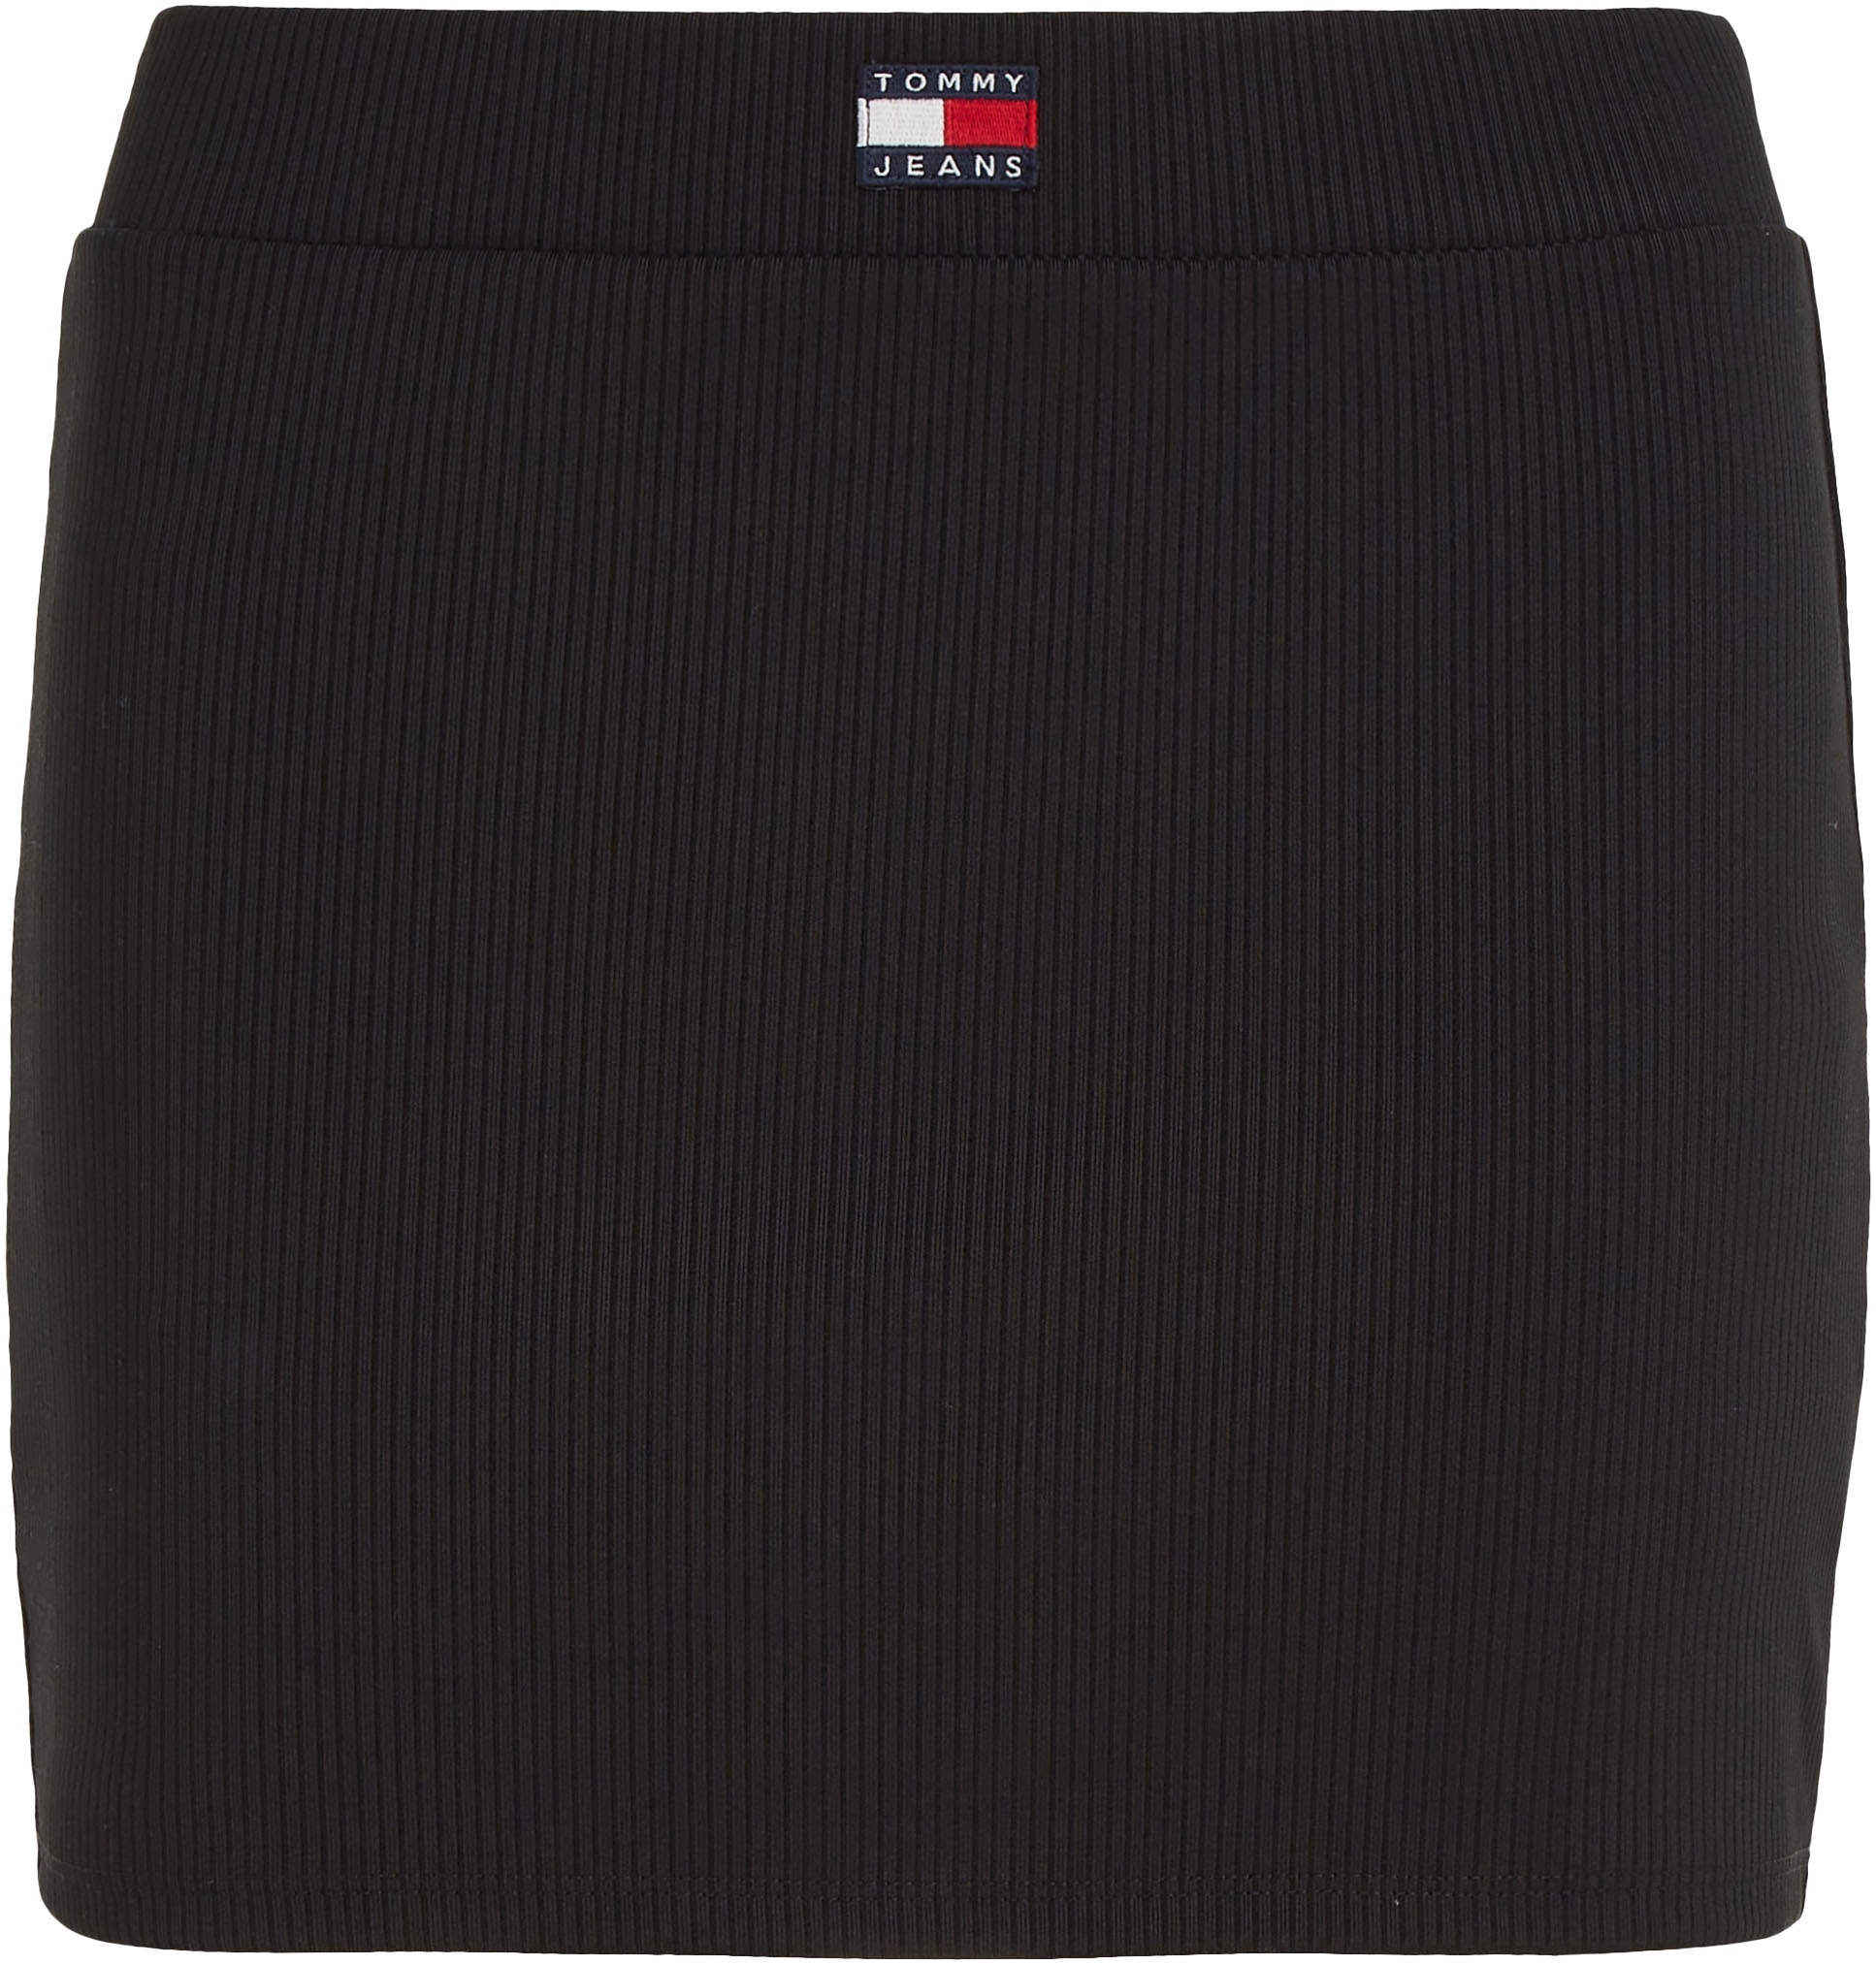 Tommy Jeans Minirock »LOW bei RISE SKIRT« BADGE ♕ MINI